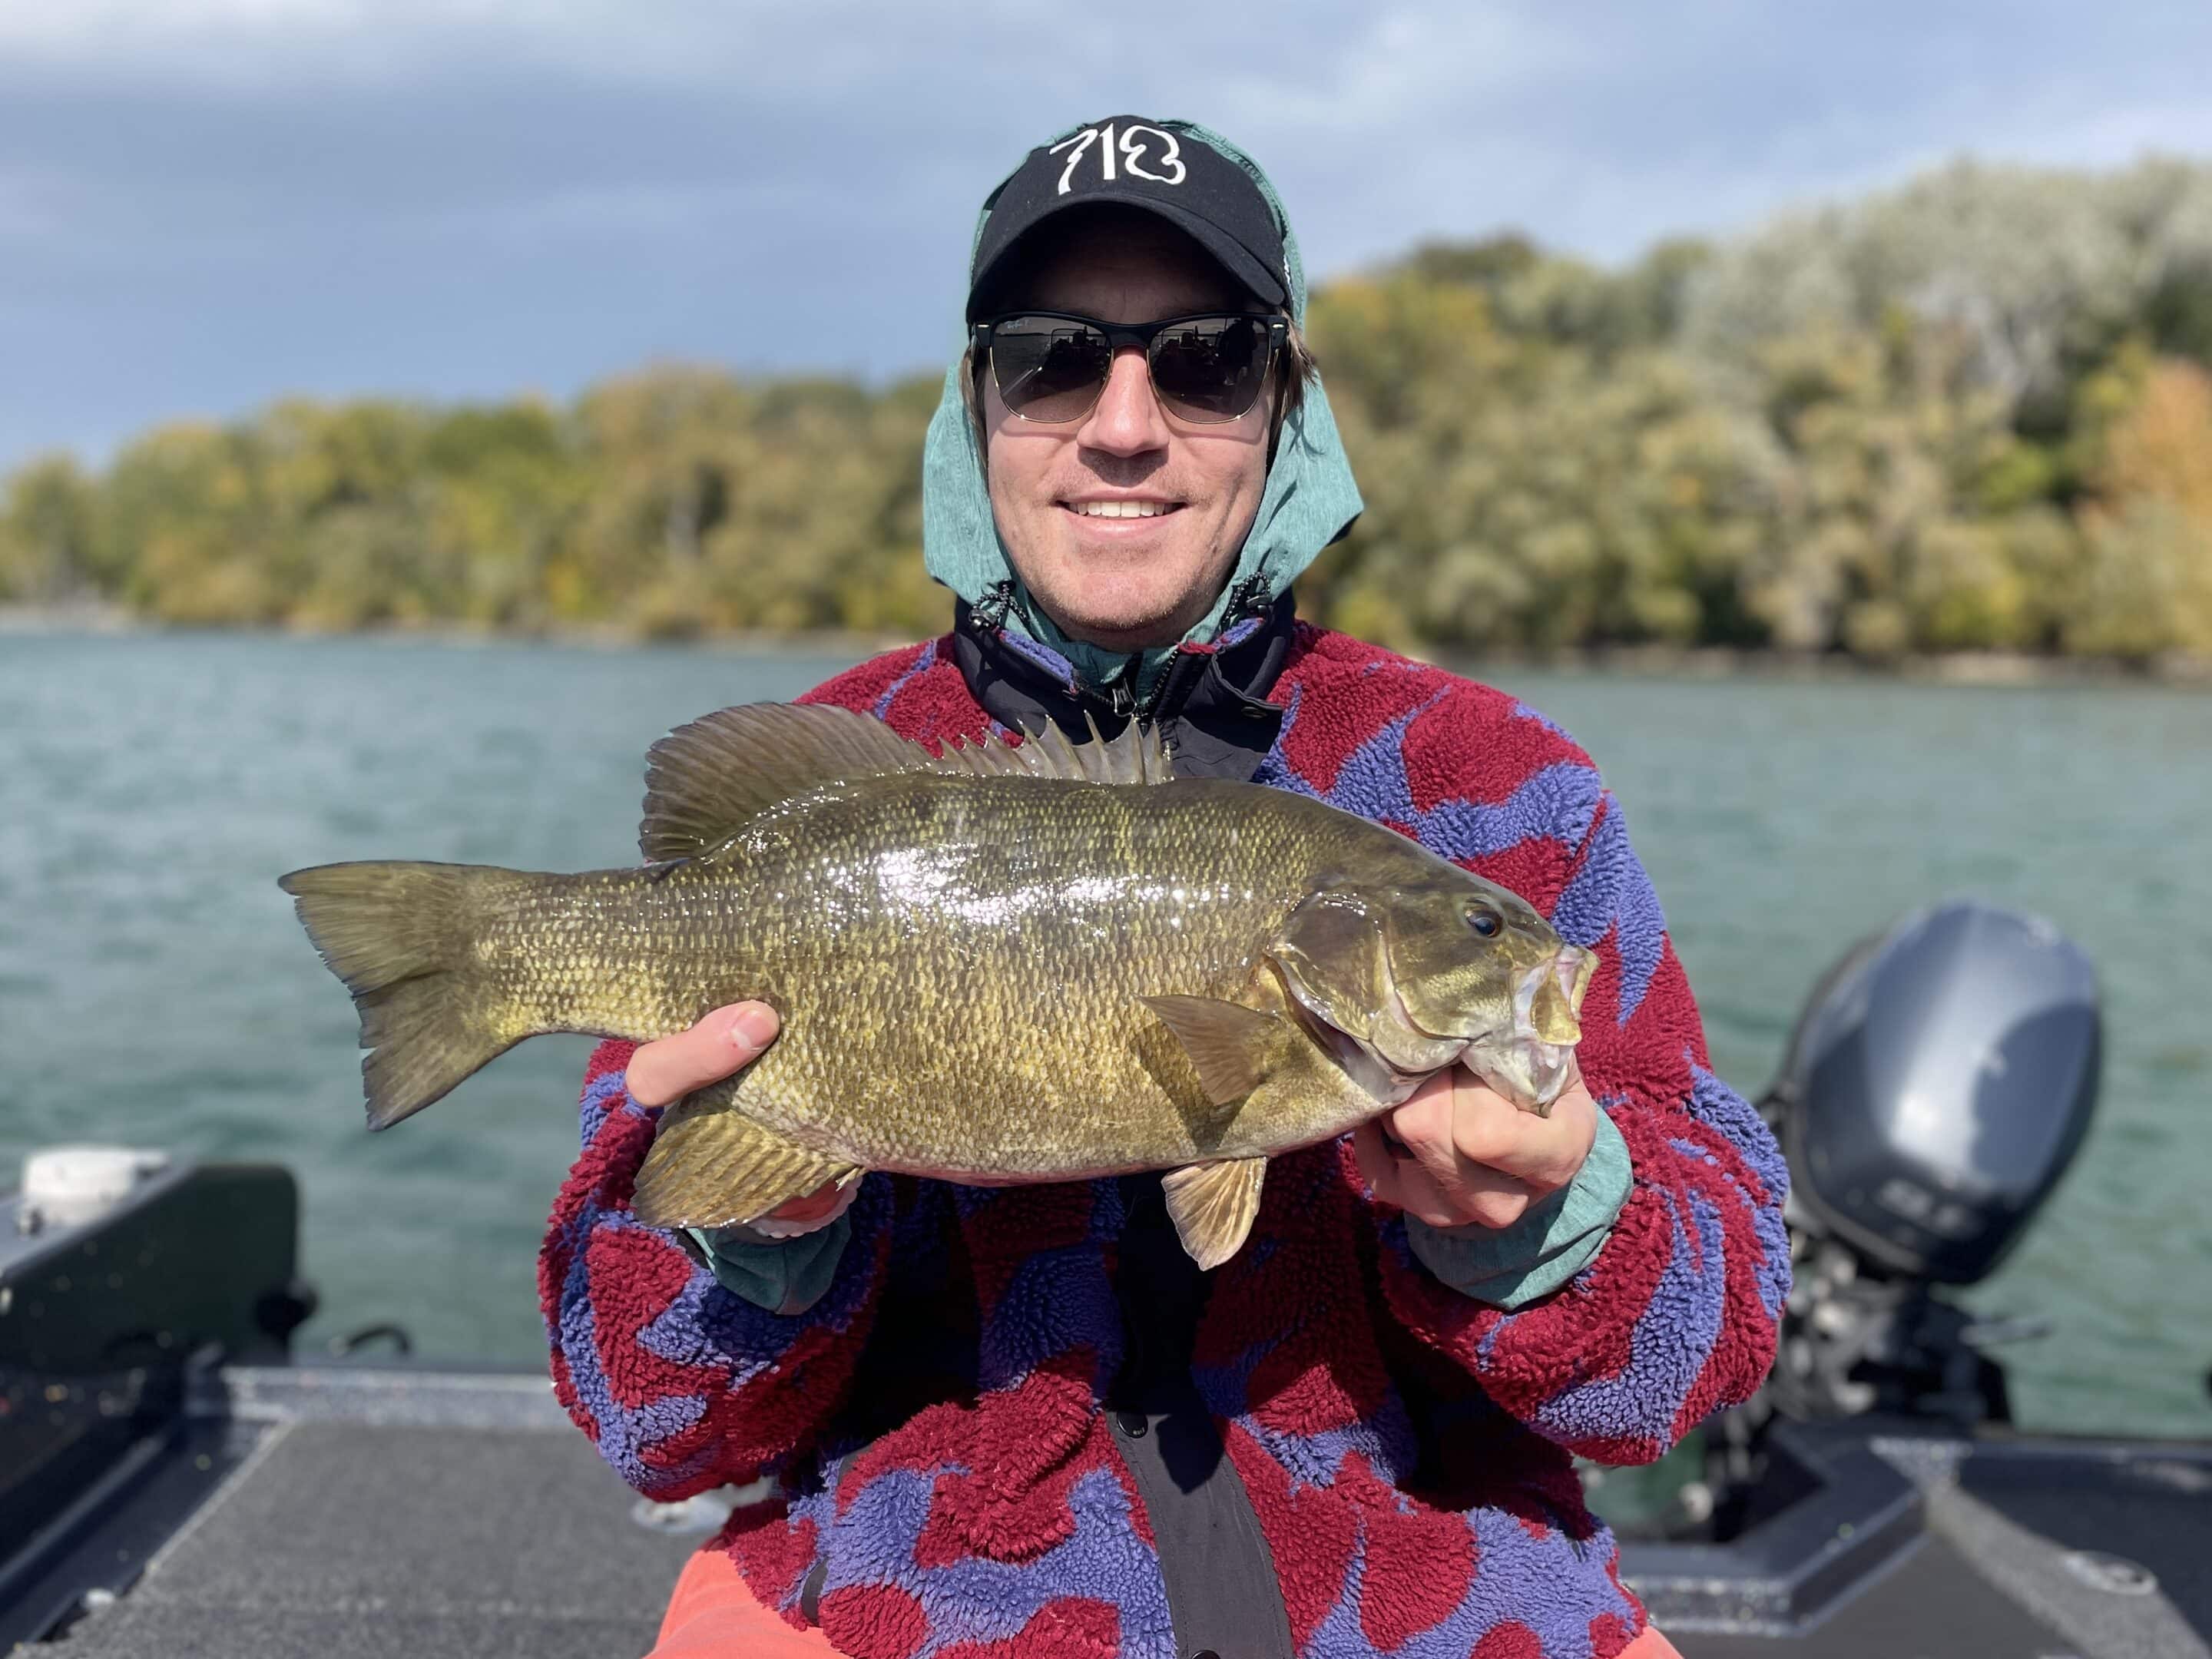 39D1005C 8789 4D85 A3D1 27D507CBA6A0 scaled - Buffalo NY Fishing Report - 10/16/2022